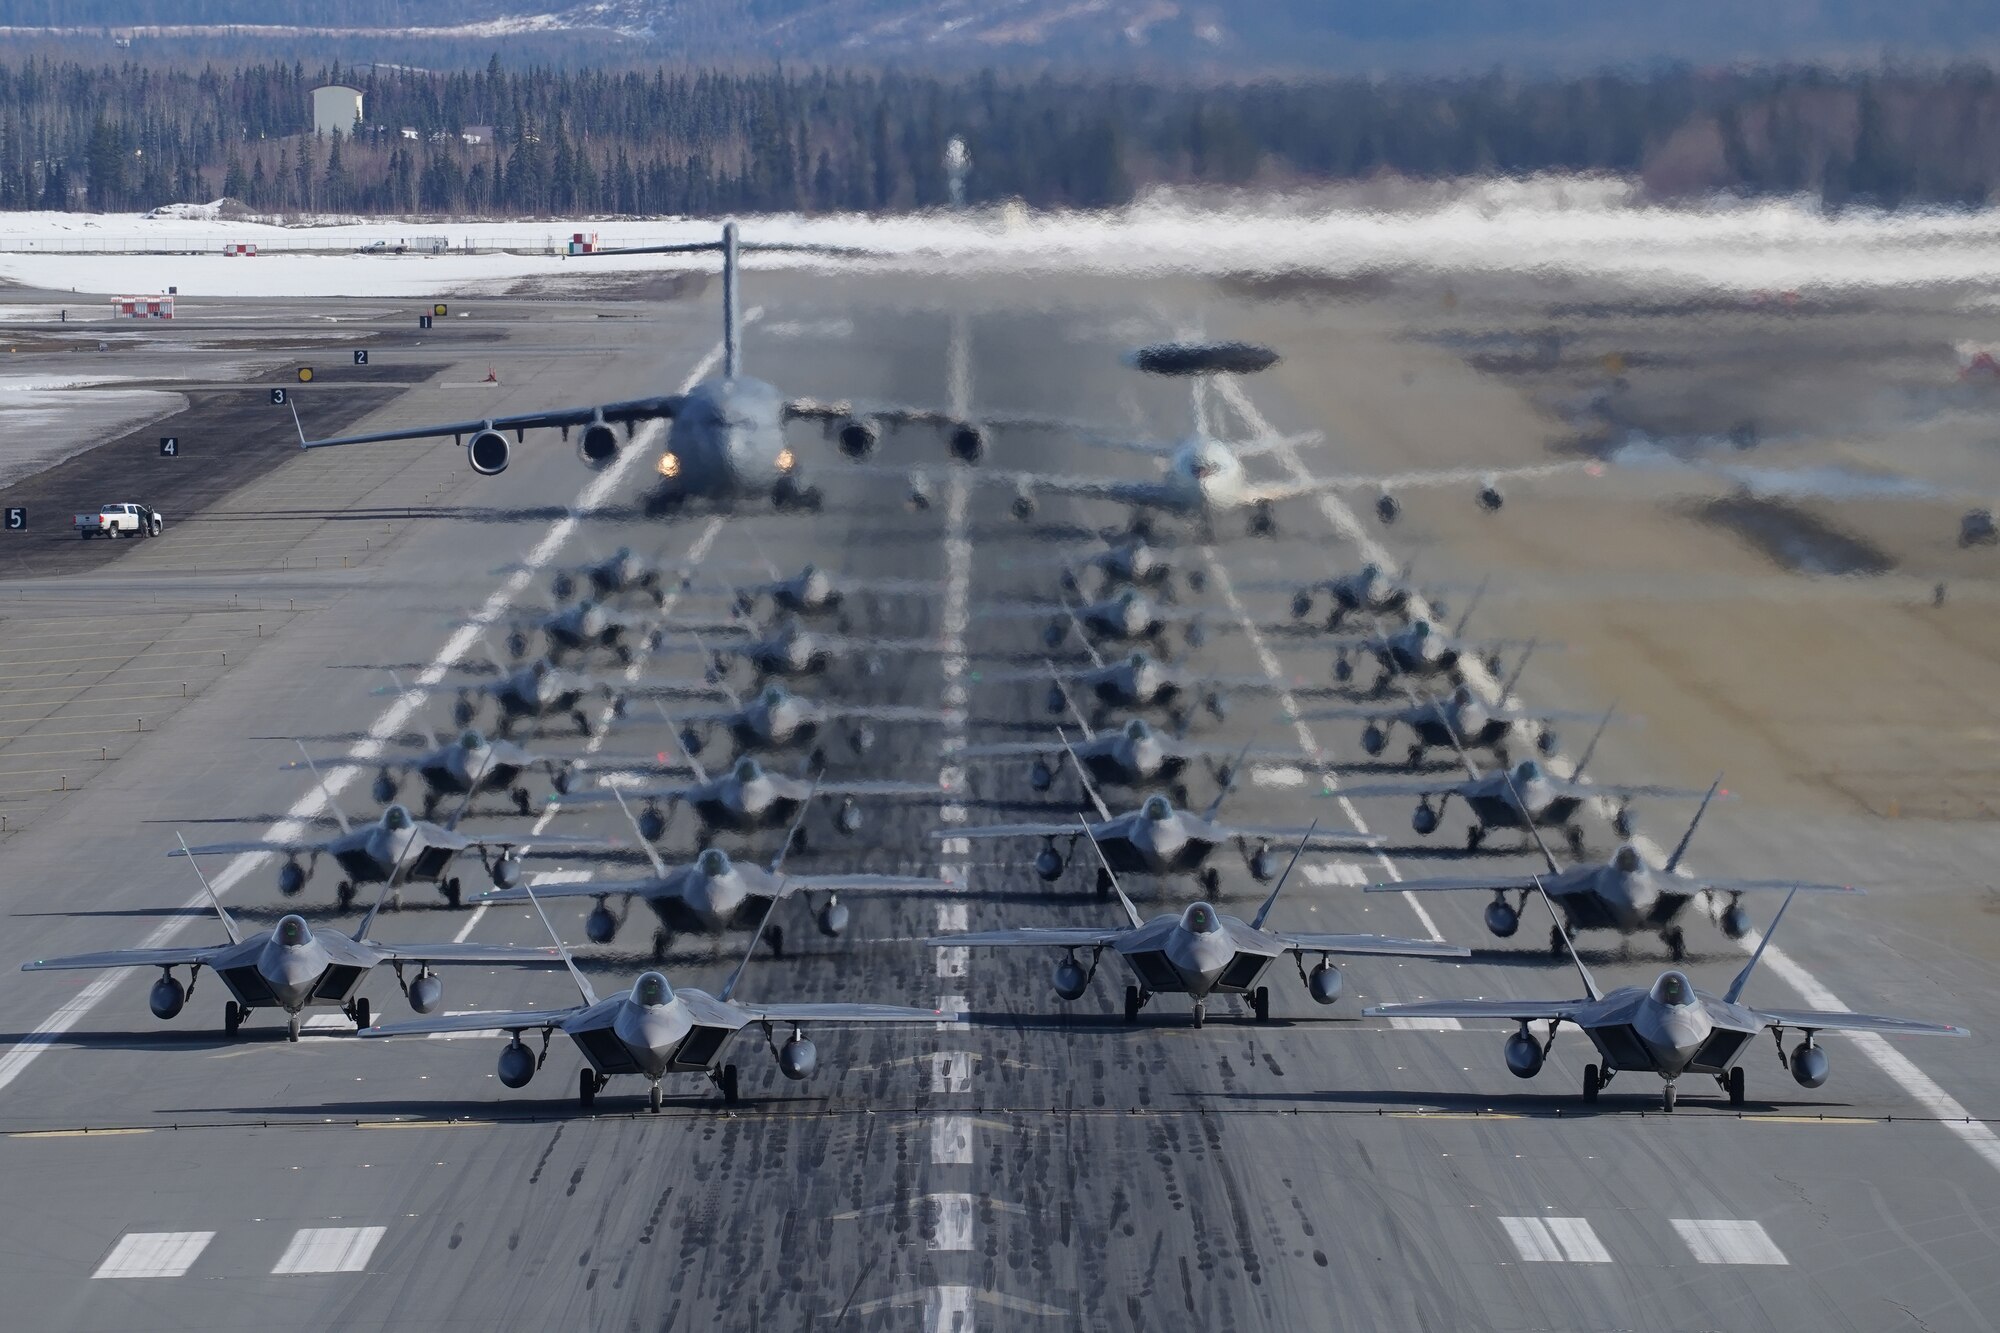 Twenty-four F-22 Raptors from 3rd Wing and 477th Fighter Group, a C-17 Globemaster III and an E-3 Sentry participate in a close formation taxi, known as an Elephant Walk, March 26, 2019, during a Polar Force exercise at Joint Base Elmendorf-Richardson, Alaska. This two-week exercise gives squadrons an opportunity to demonstrate their abilities to forward deploy and deliver overwhelming combat power. (U.S. Air Force photo/Justin Connaher)